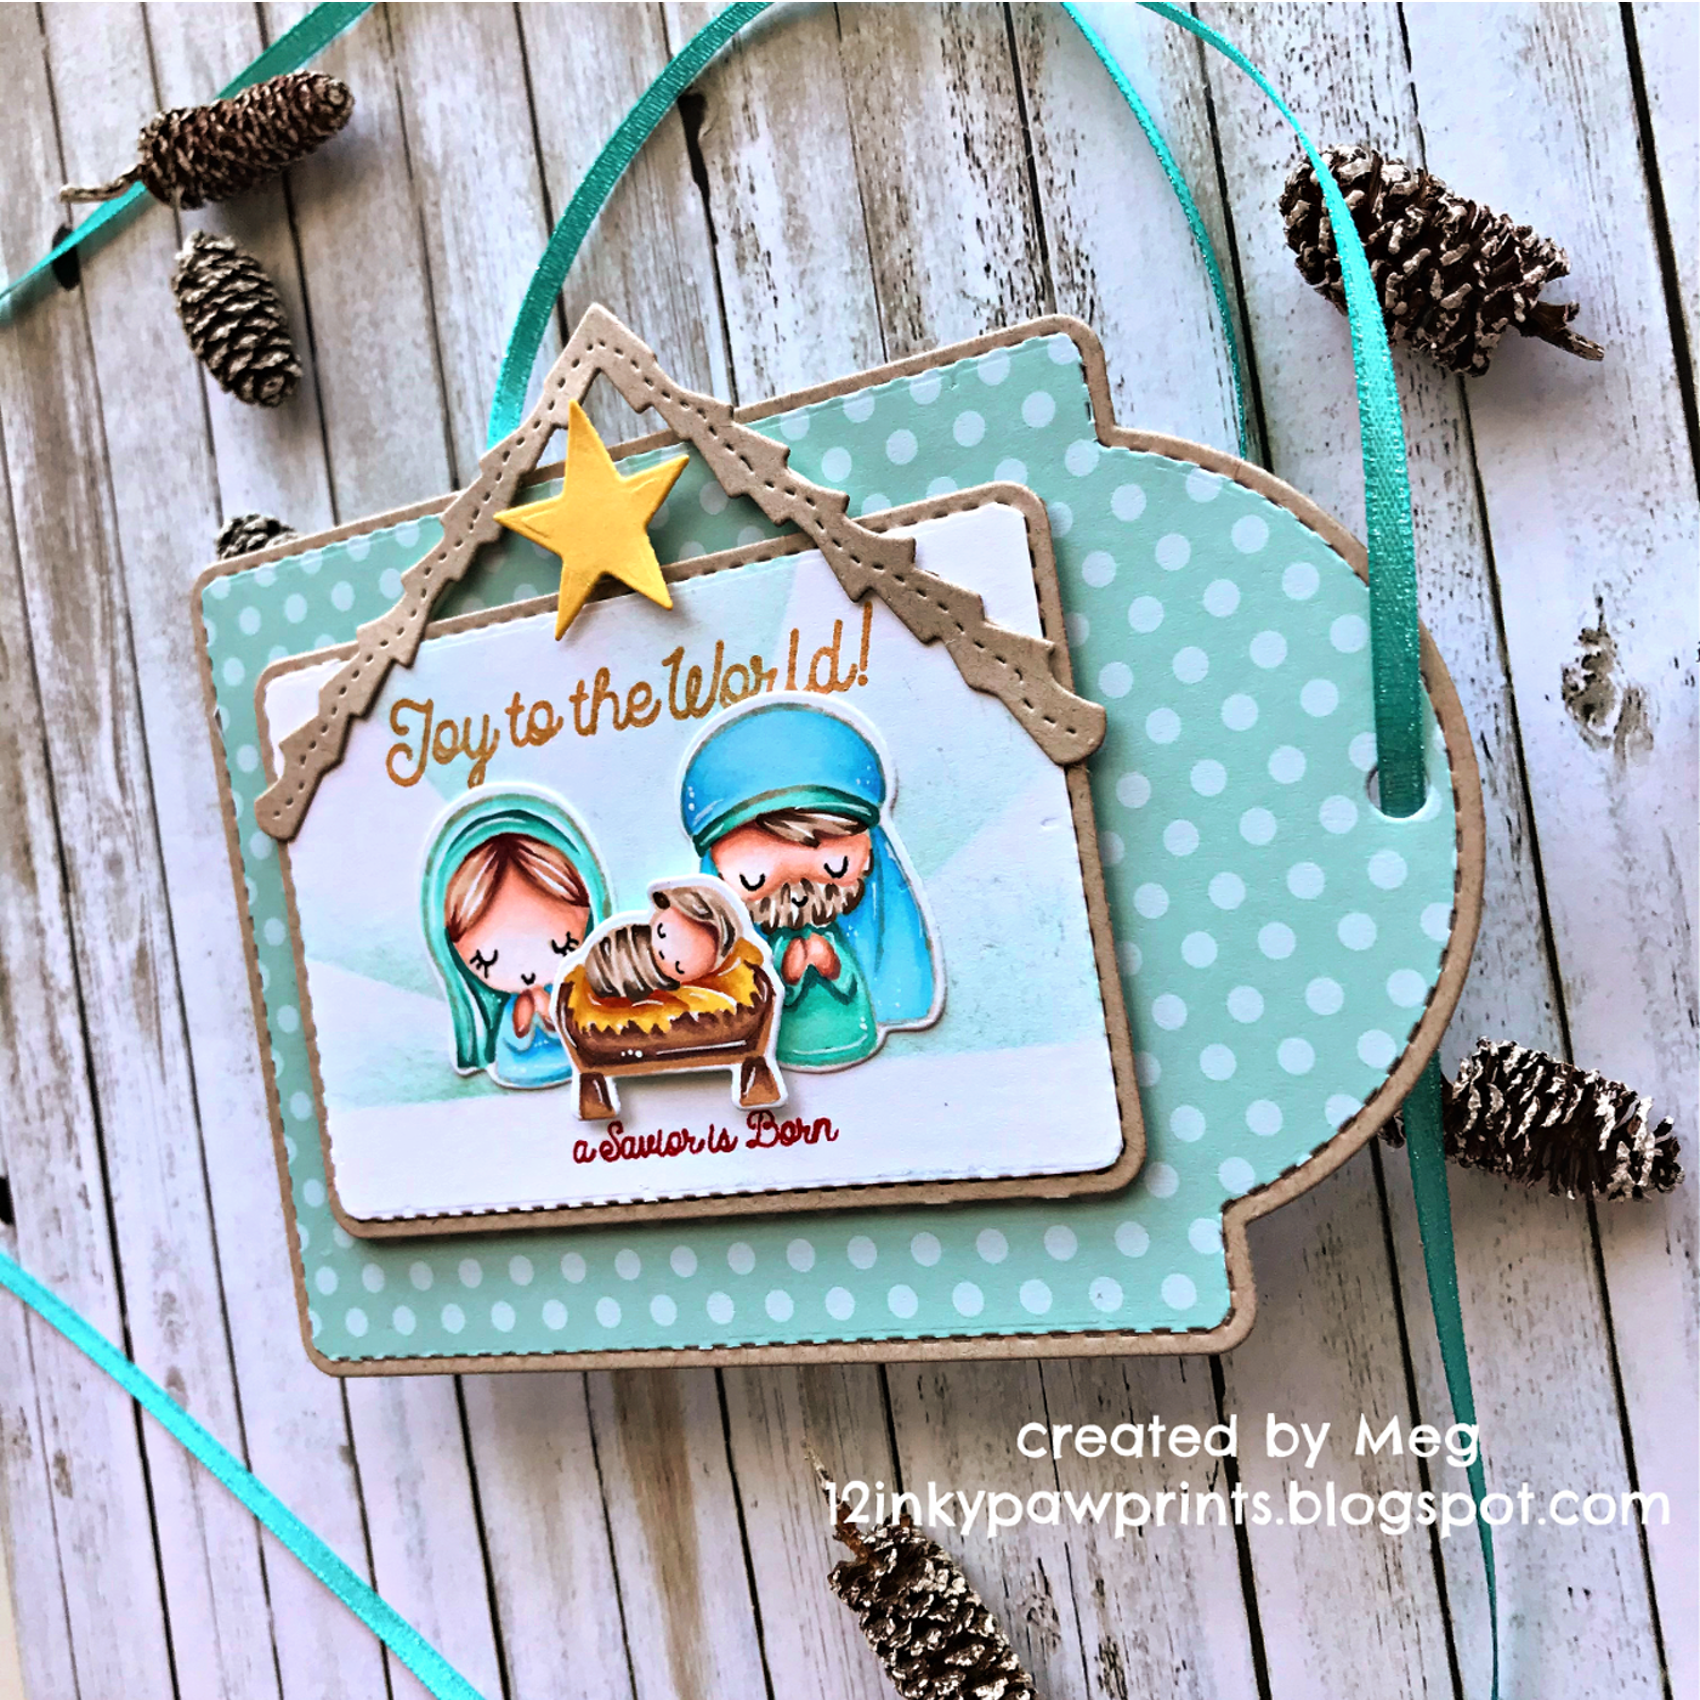 Guest Designer Meg with a Peace On Earth Tag